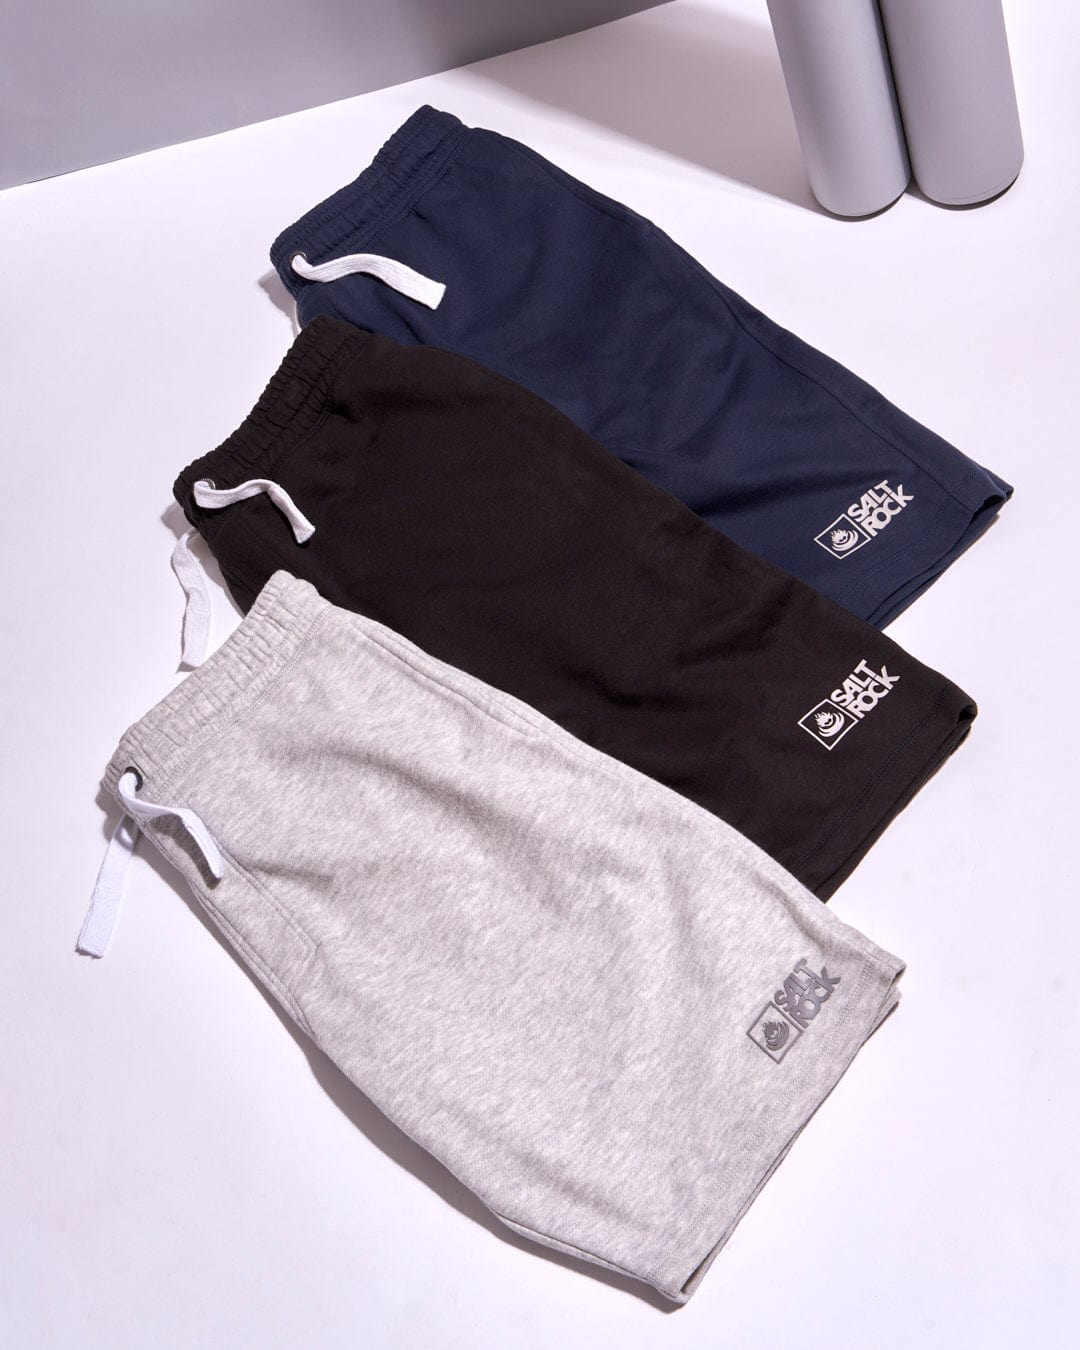 A group of Saltrock Original 20 - Mens Sweat Shorts - Blue Marl on a white surface featuring contrasting draw cords and elasticated waist.